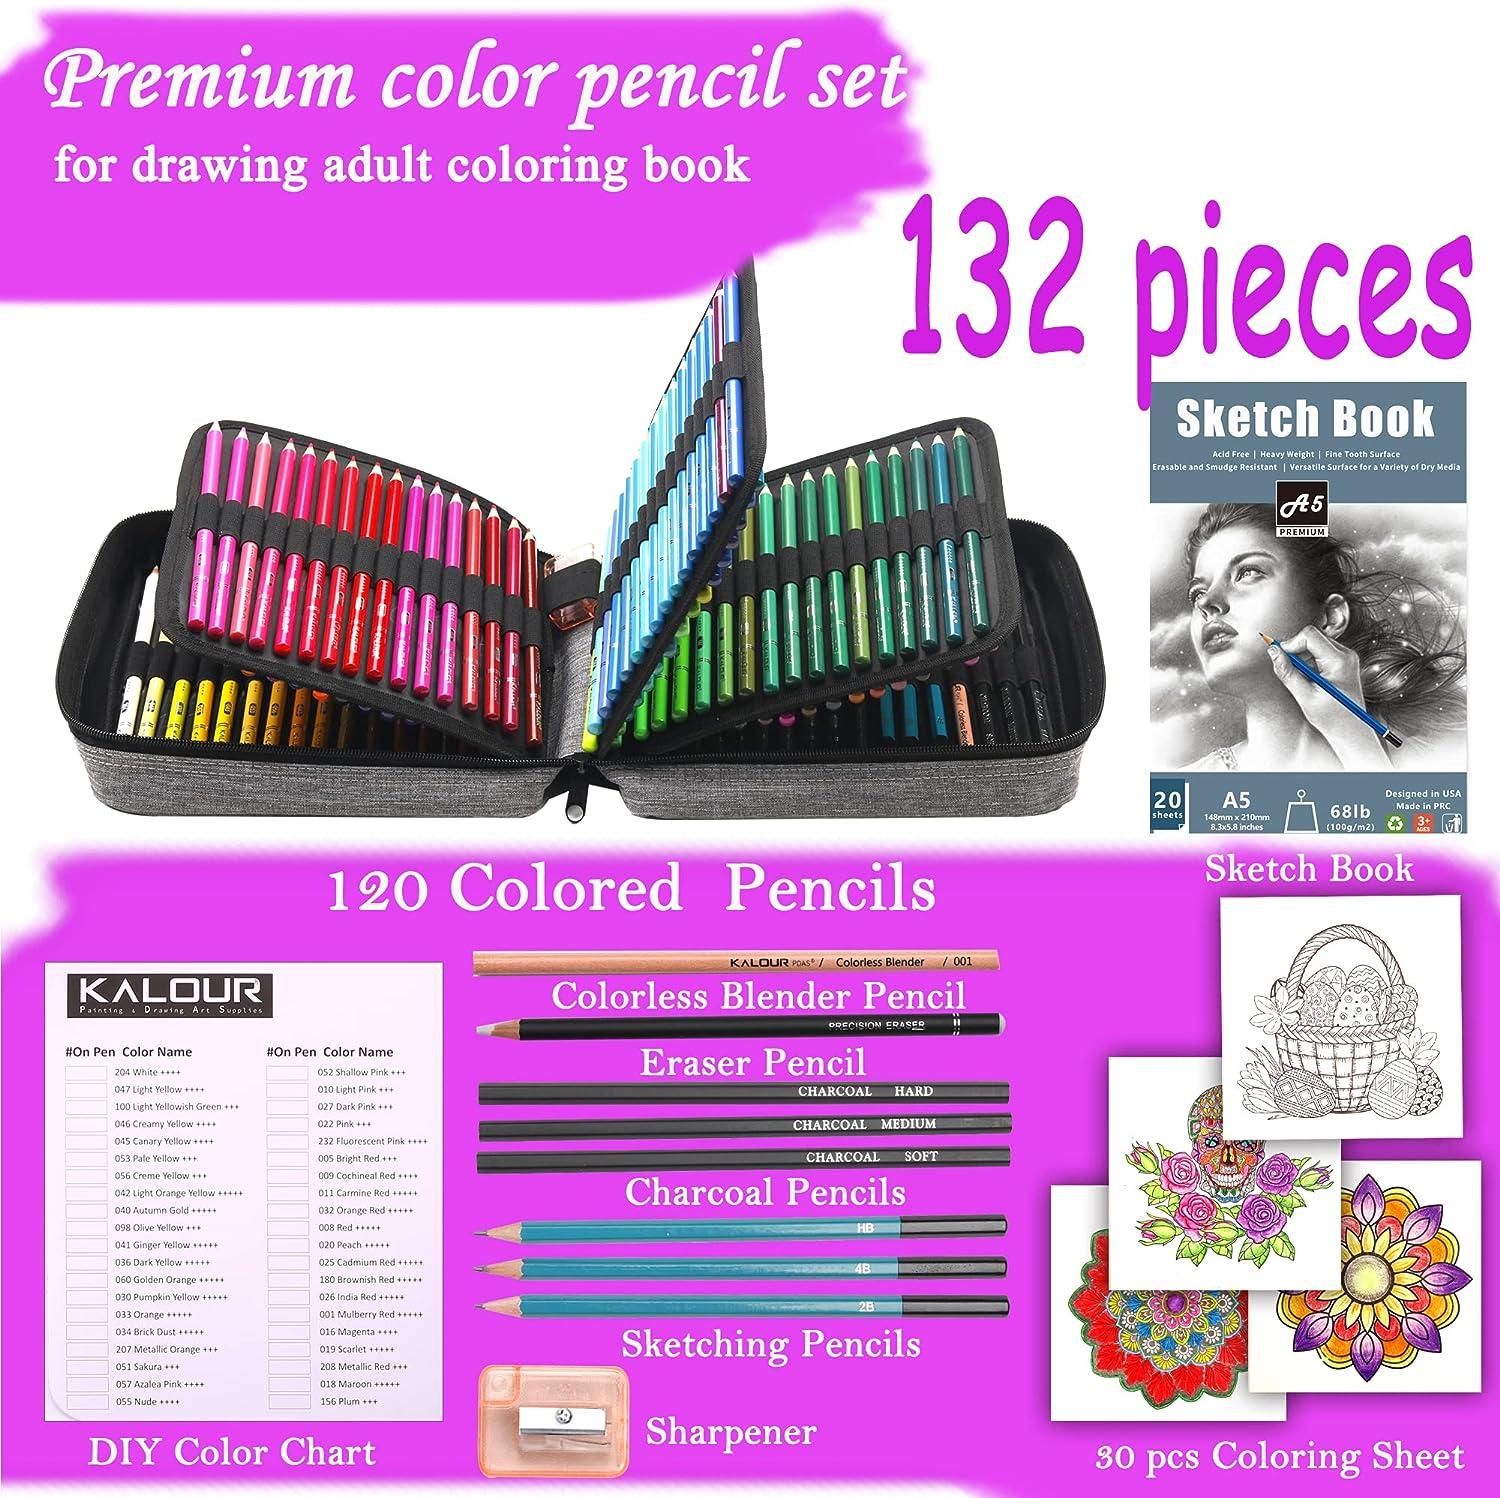 100 Colored Pencils Swatch Chart